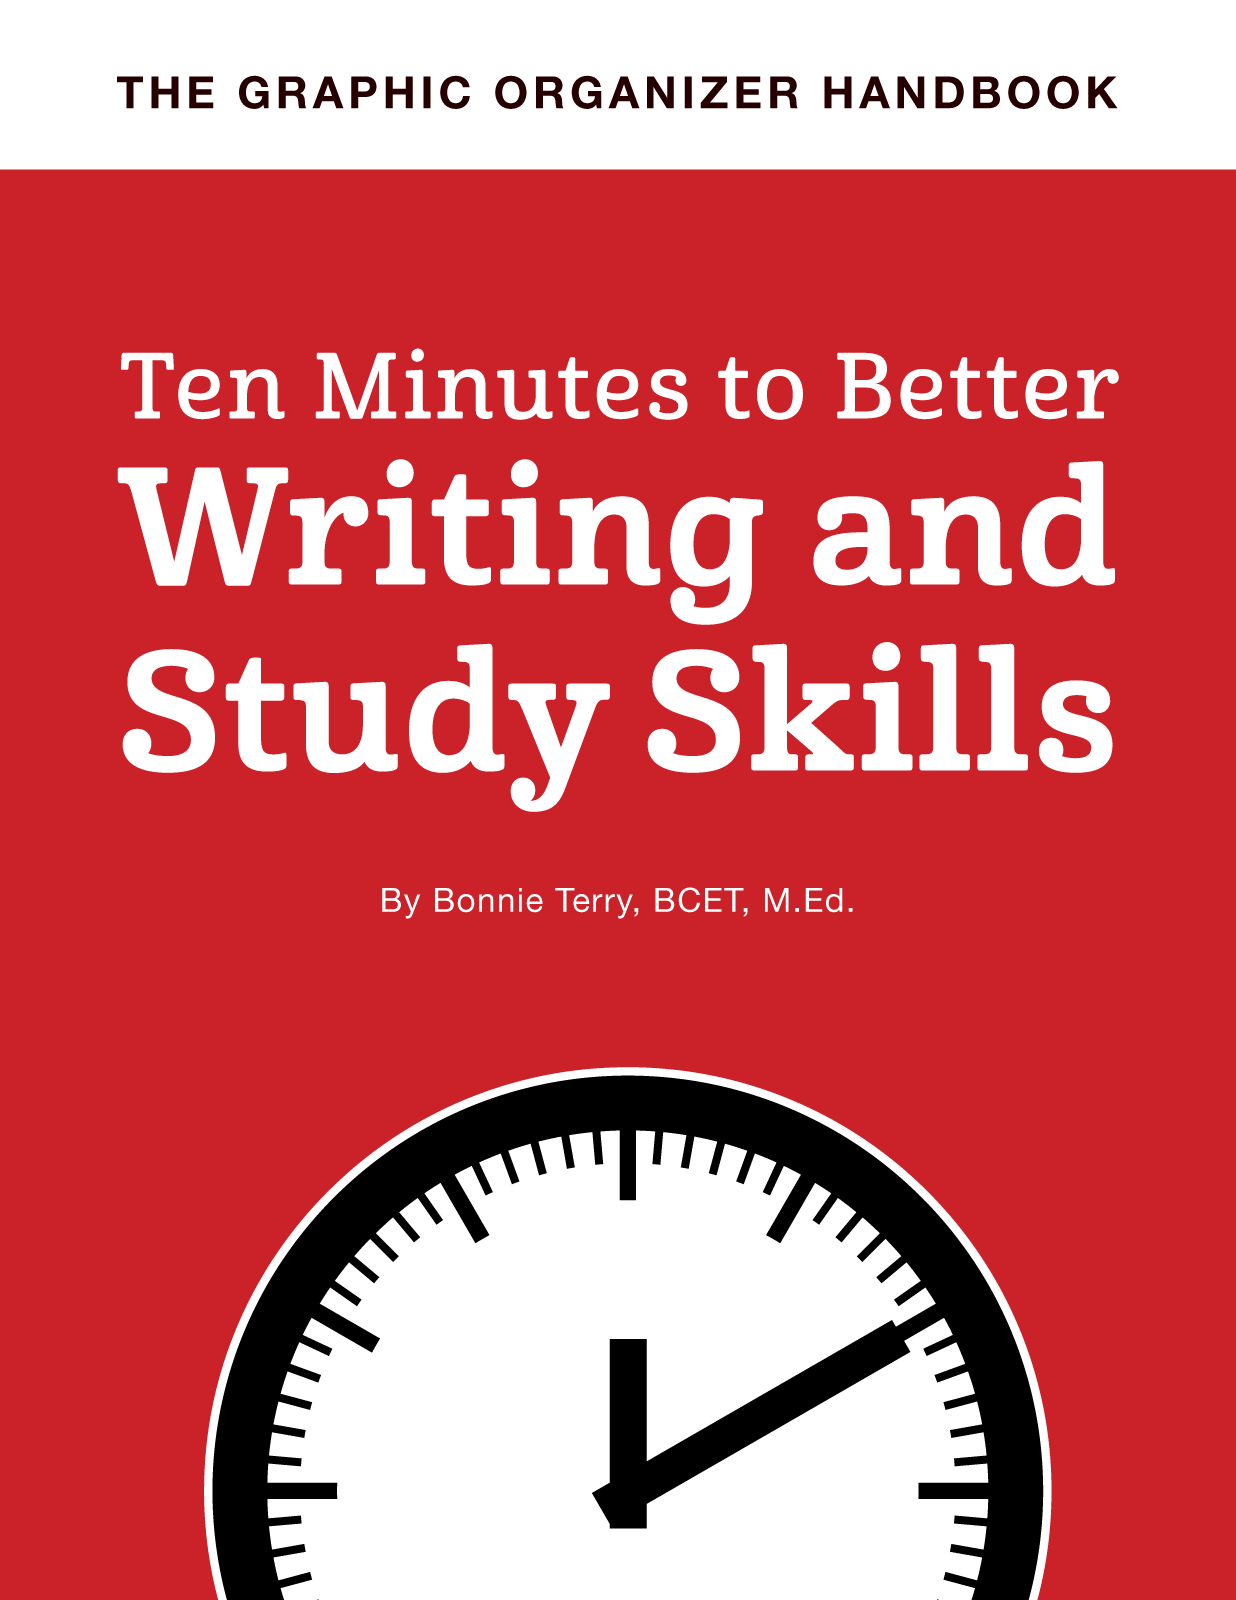 Ten Minutes to Better Writing and Study Skills